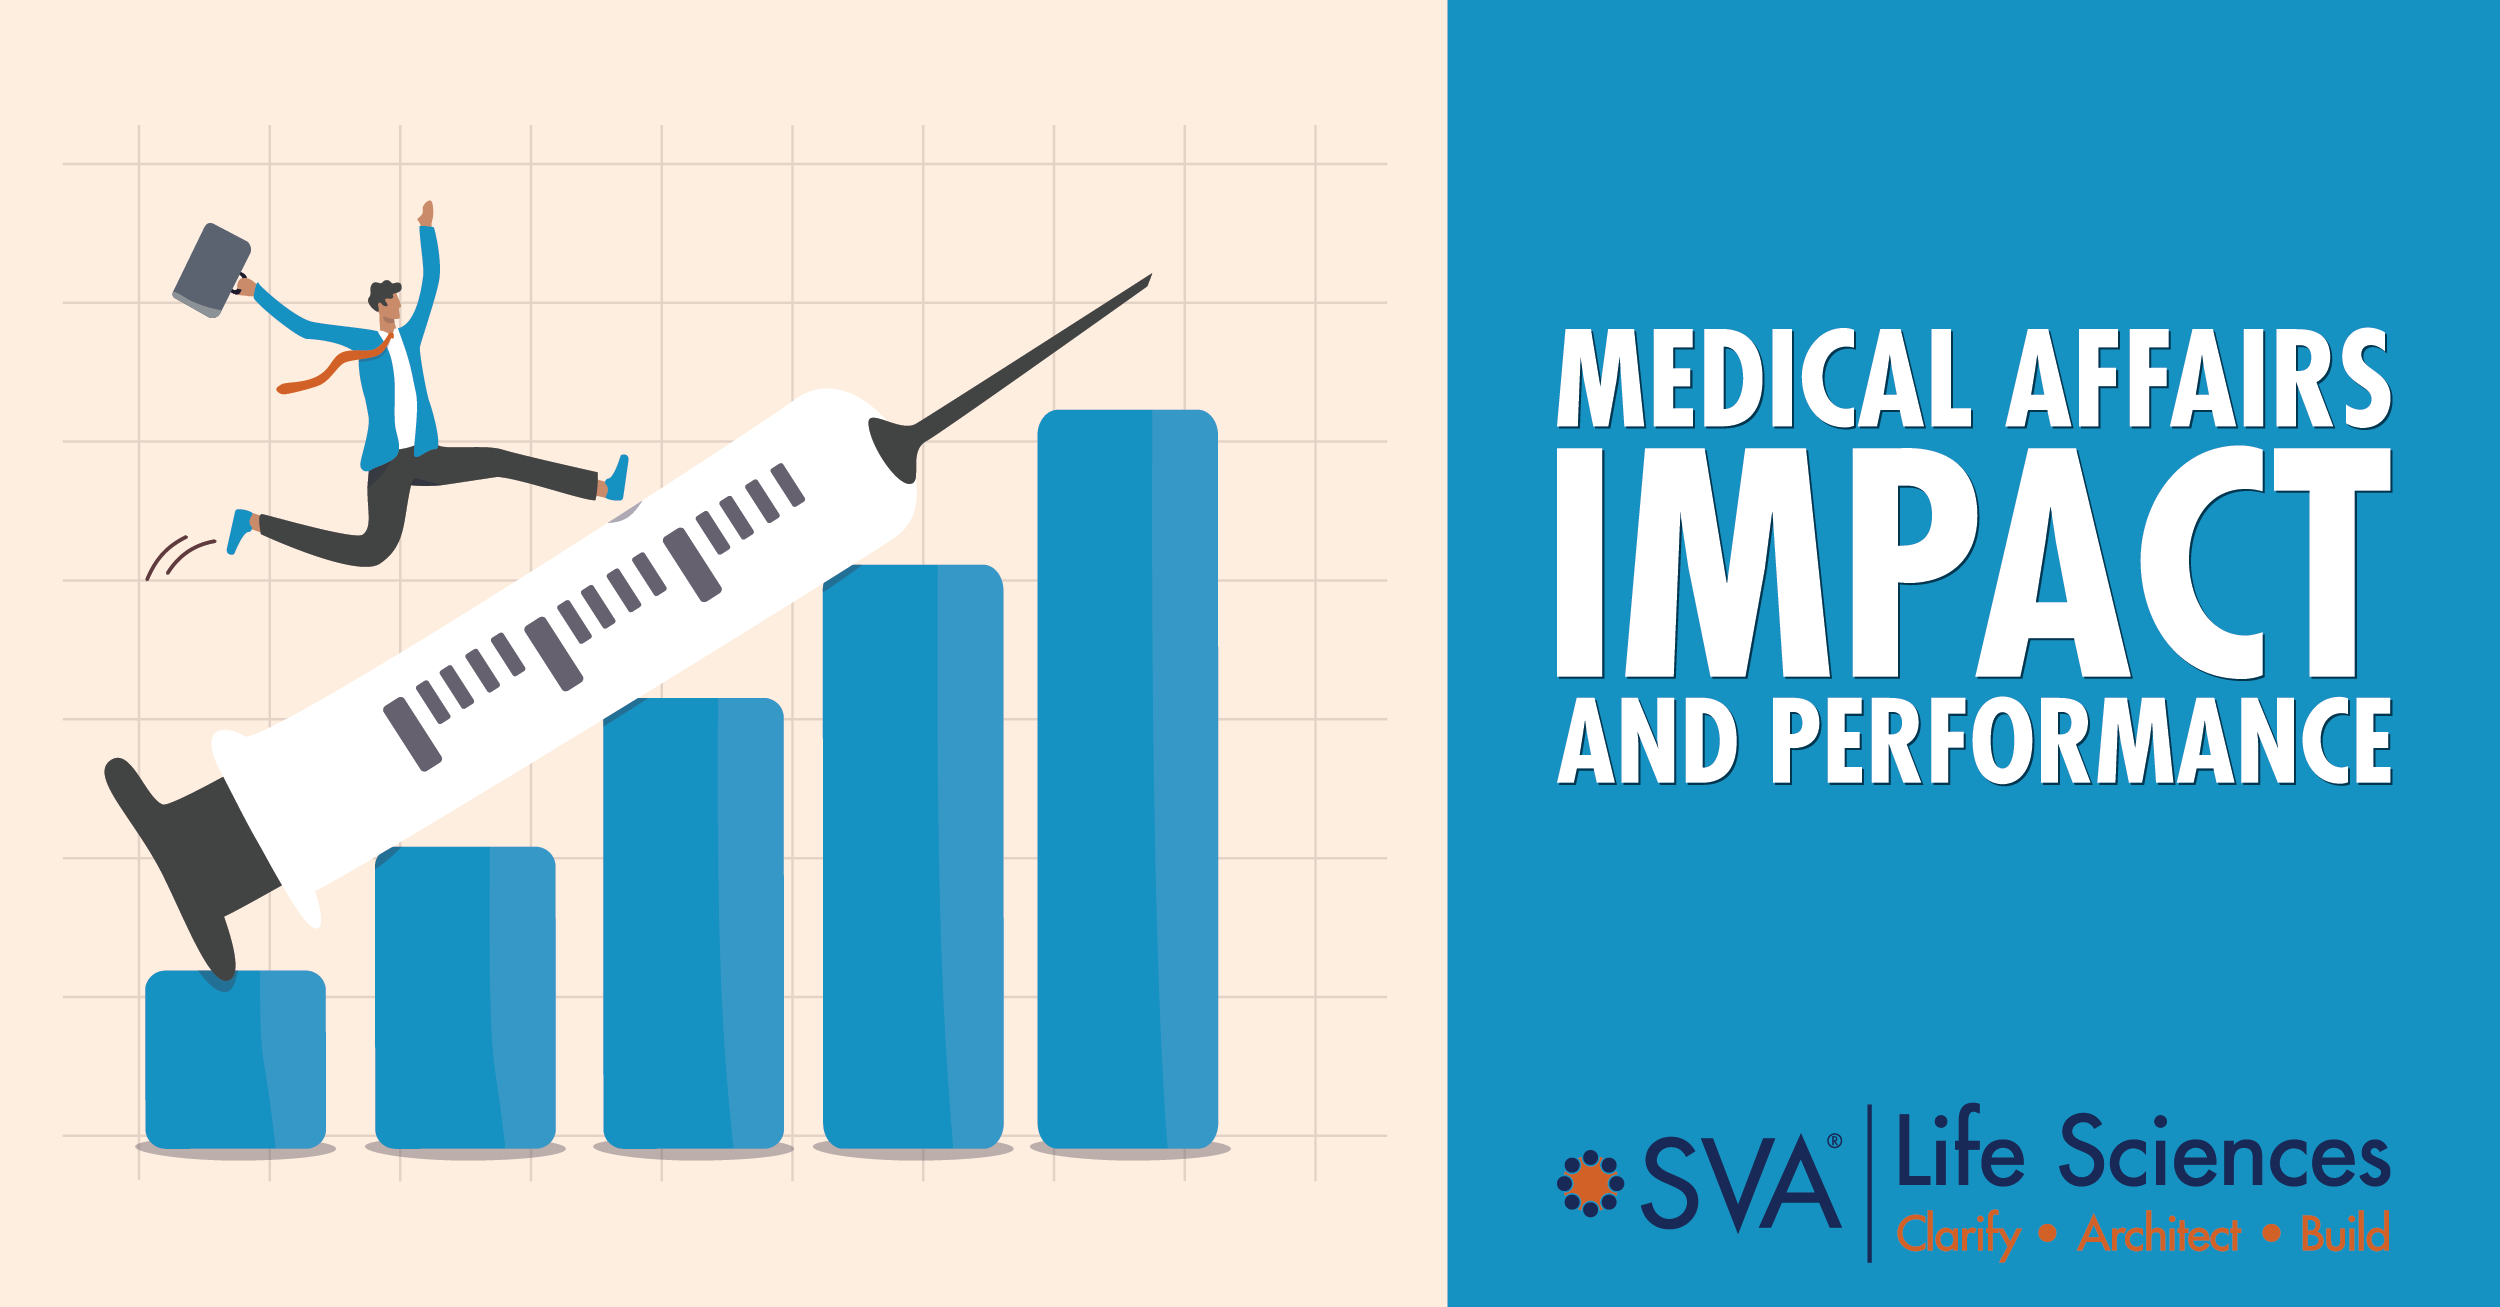 Medical Affairs Impact and Performance | SVA Life Sciences